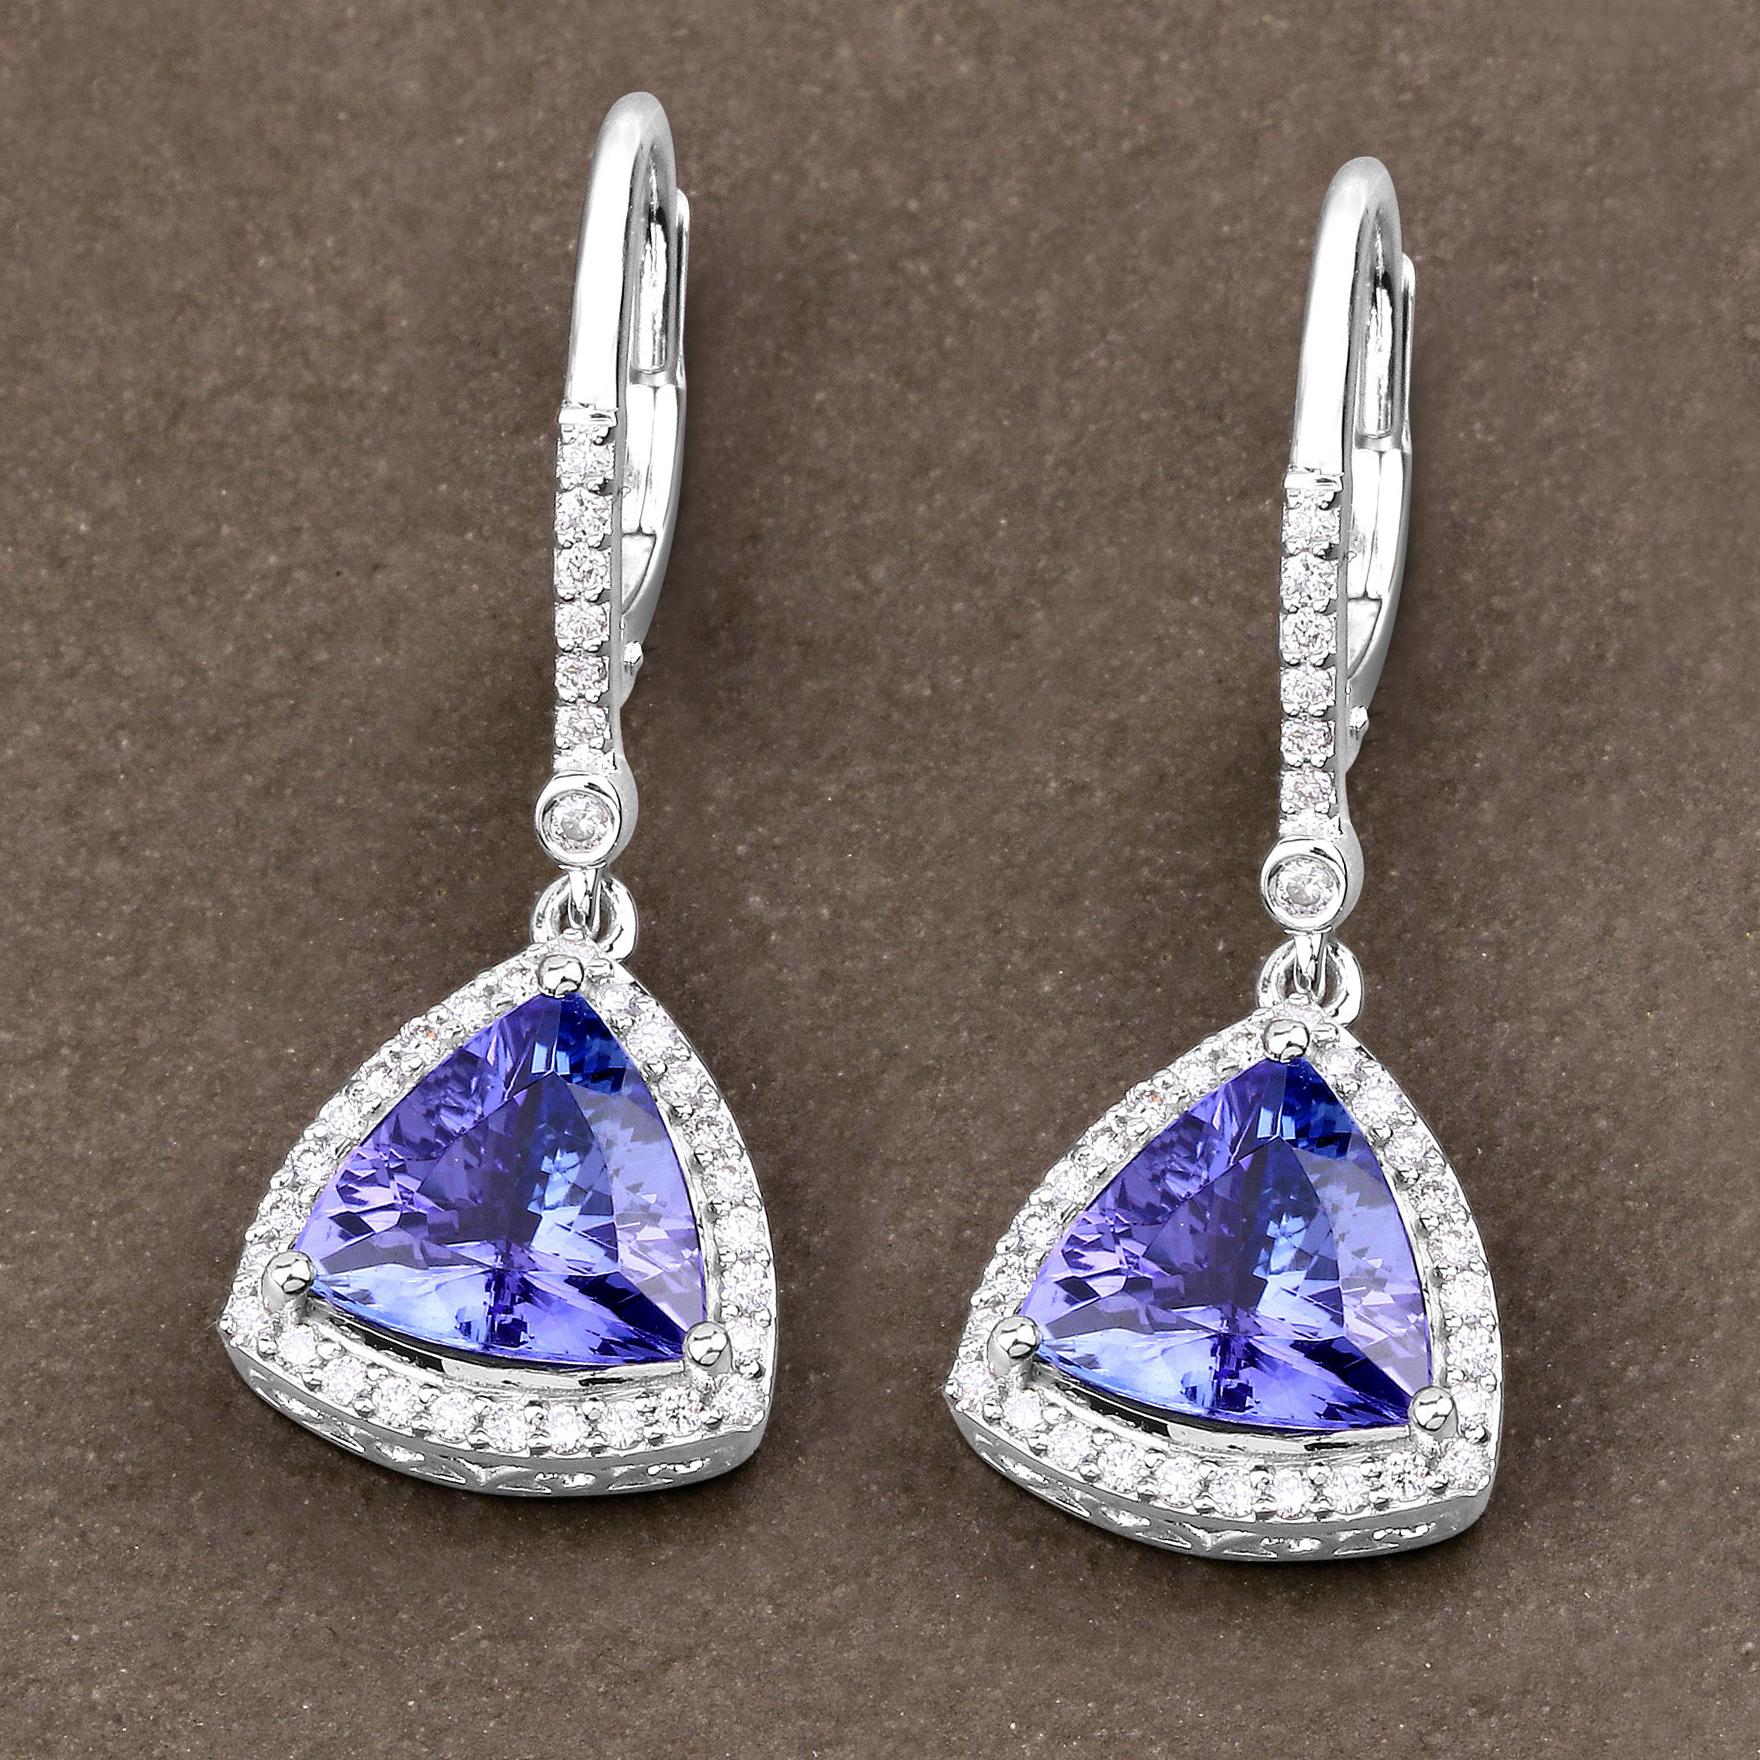 Tanzanite Dangle Earrings With Diamonds 4.61 Carats 14K White Gold In Excellent Condition For Sale In Laguna Niguel, CA